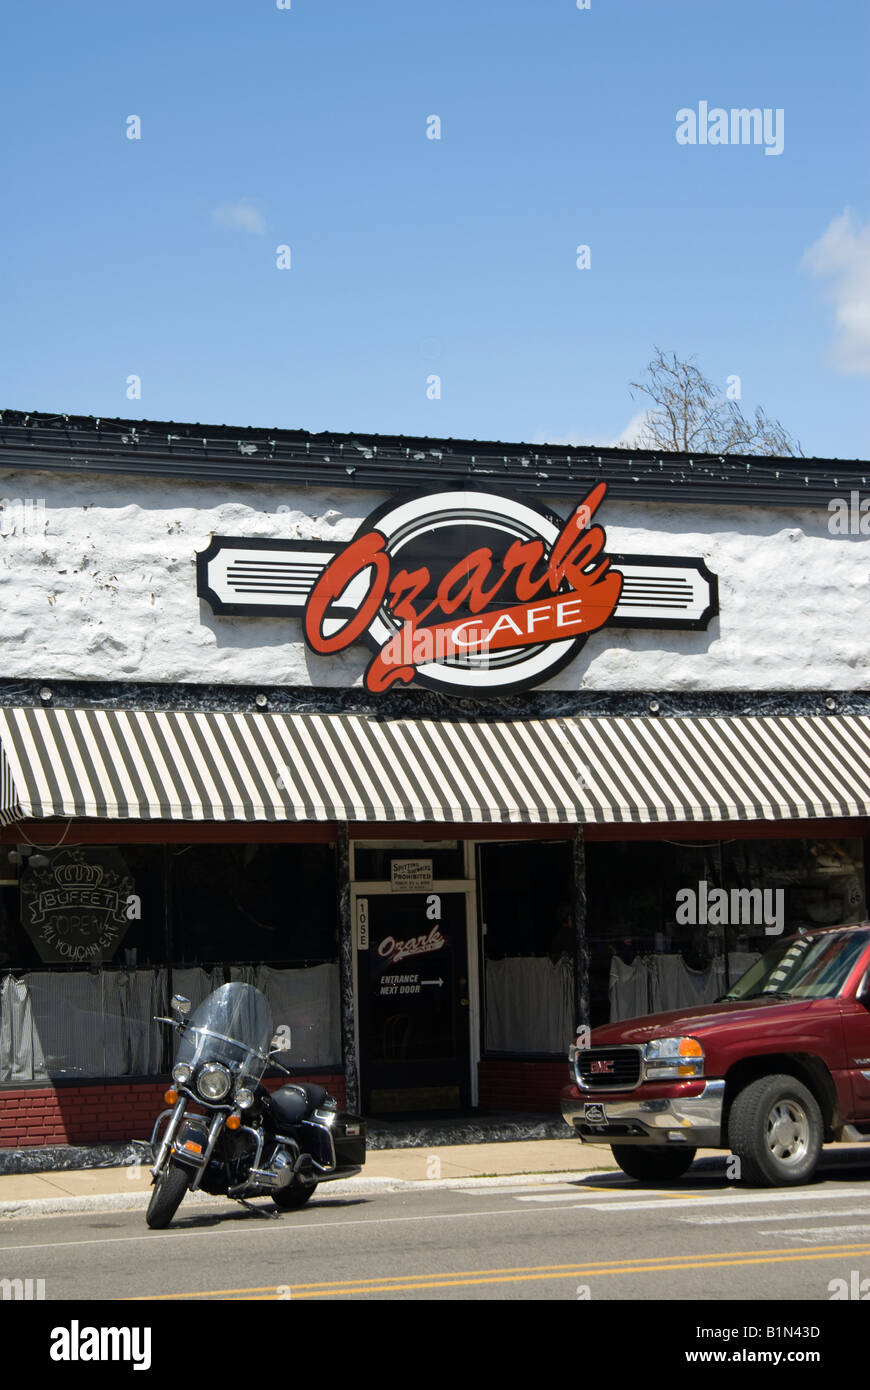 The Ozark Cafe on is a landmark in Jasper Arkansas It is on the Scenic 7 Byway through the Ozark Mountains Stock Photo